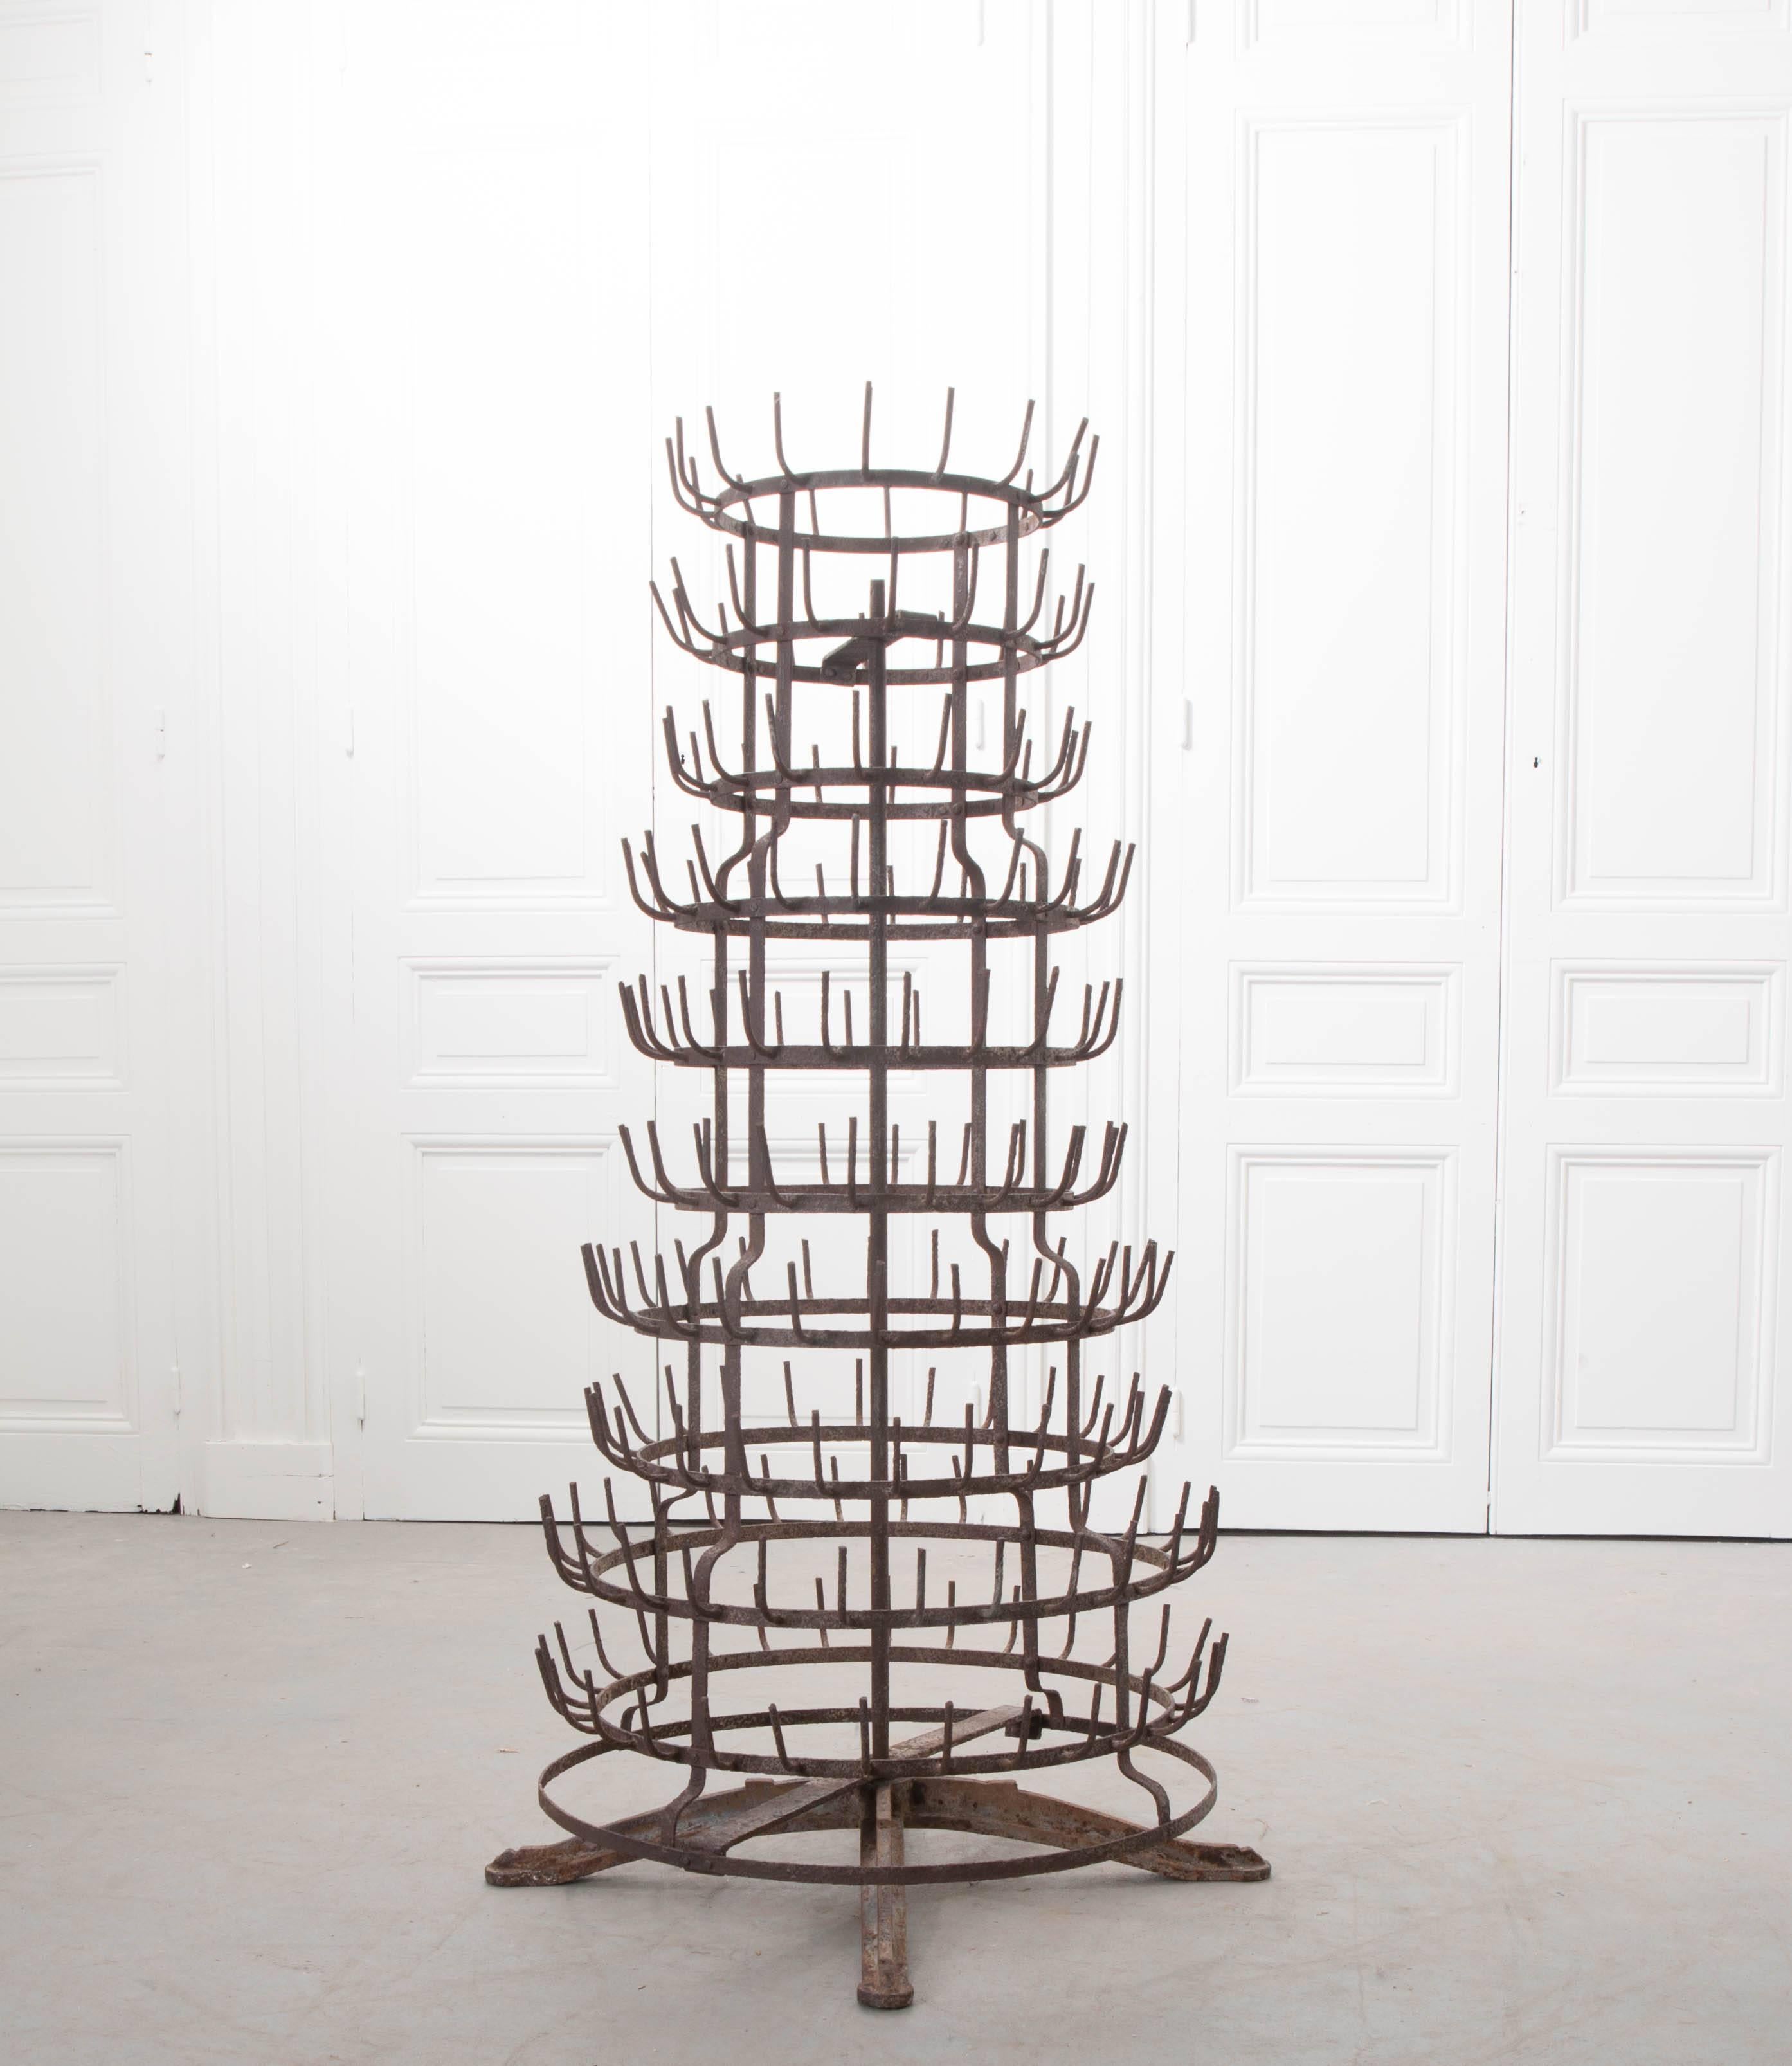 This interesting antique is used to dry glass bottles, usually wine, and almost always in France! This particular drying rack features a circular design that is affixed to a base, allowing the rack to be spun around for easier loading and unloading.